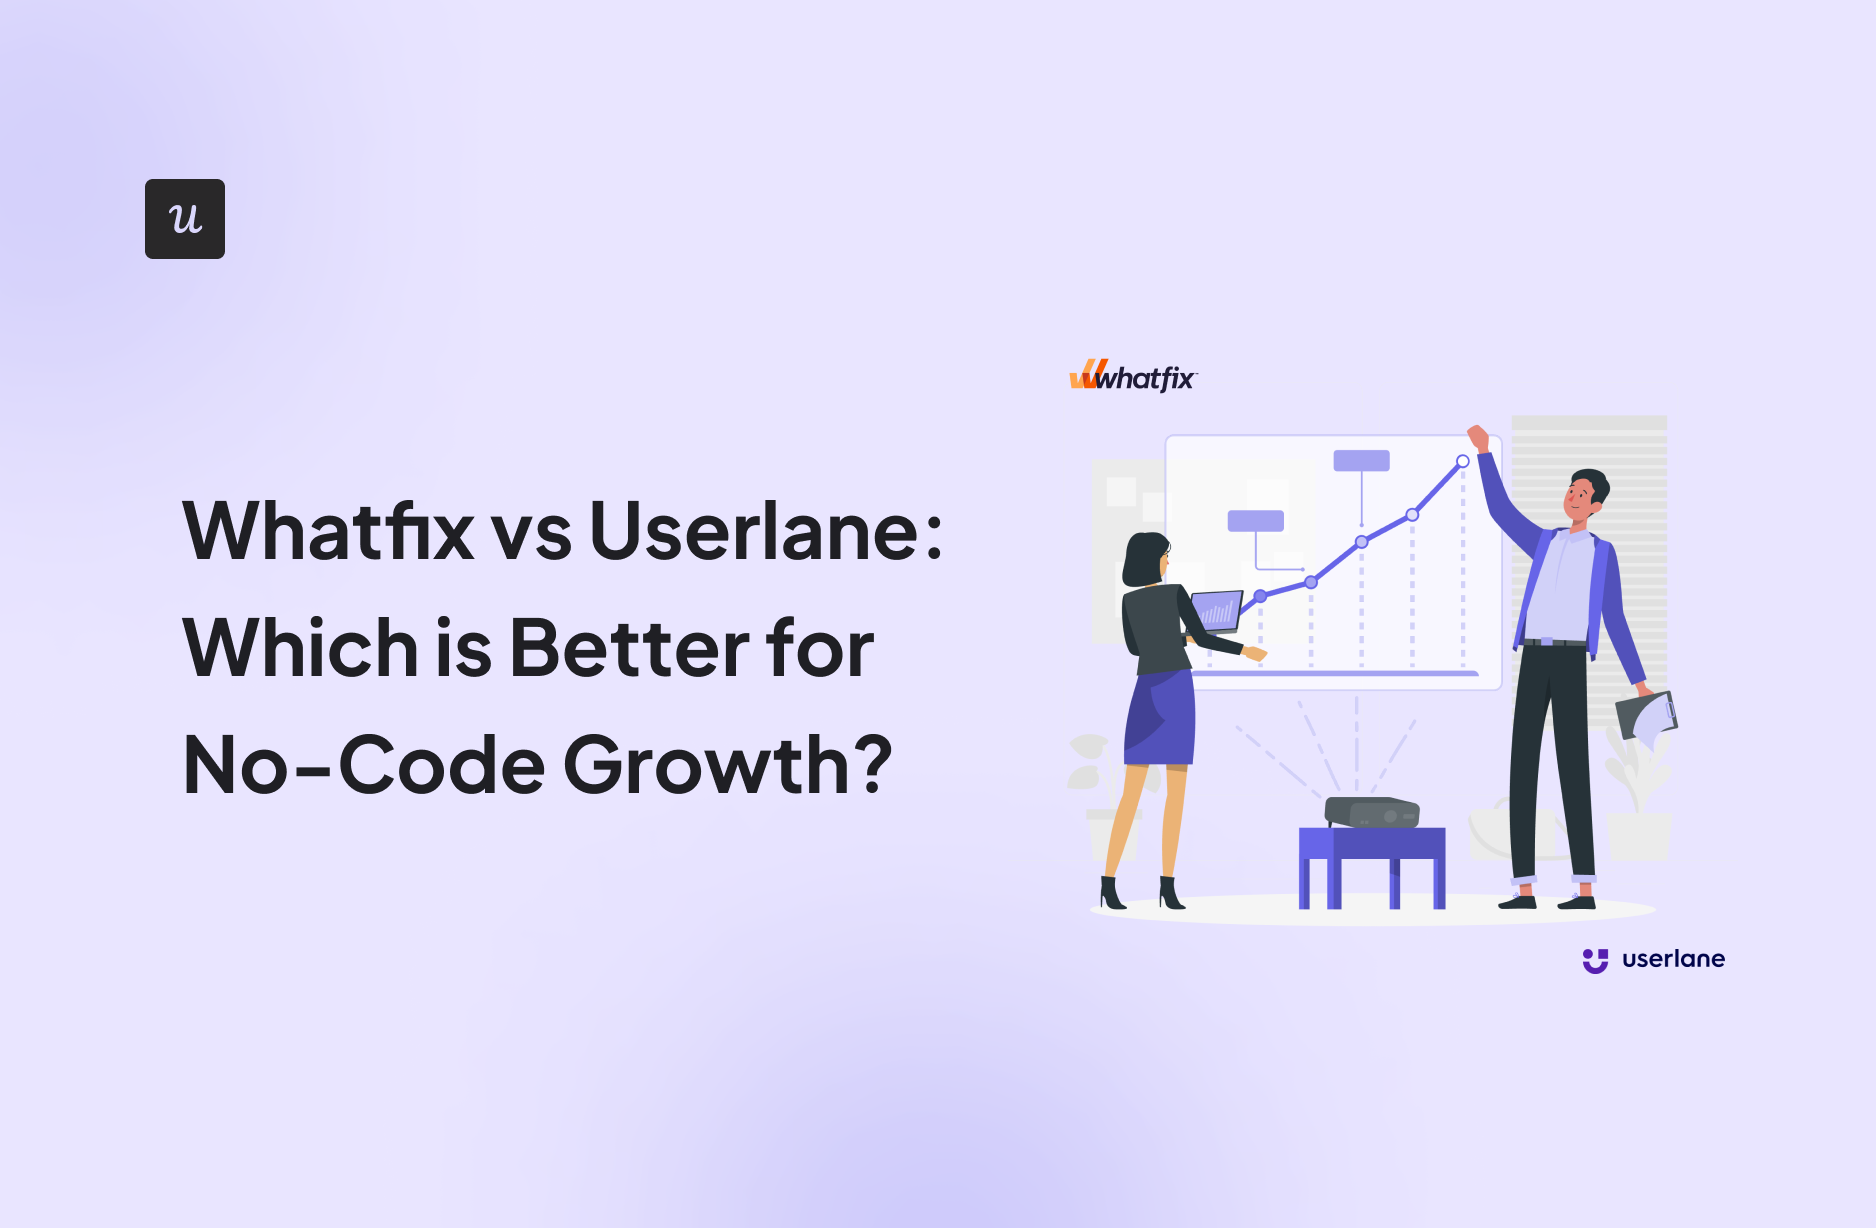 Whatfix vs Userlane: Which is Better for No-Code Growth?